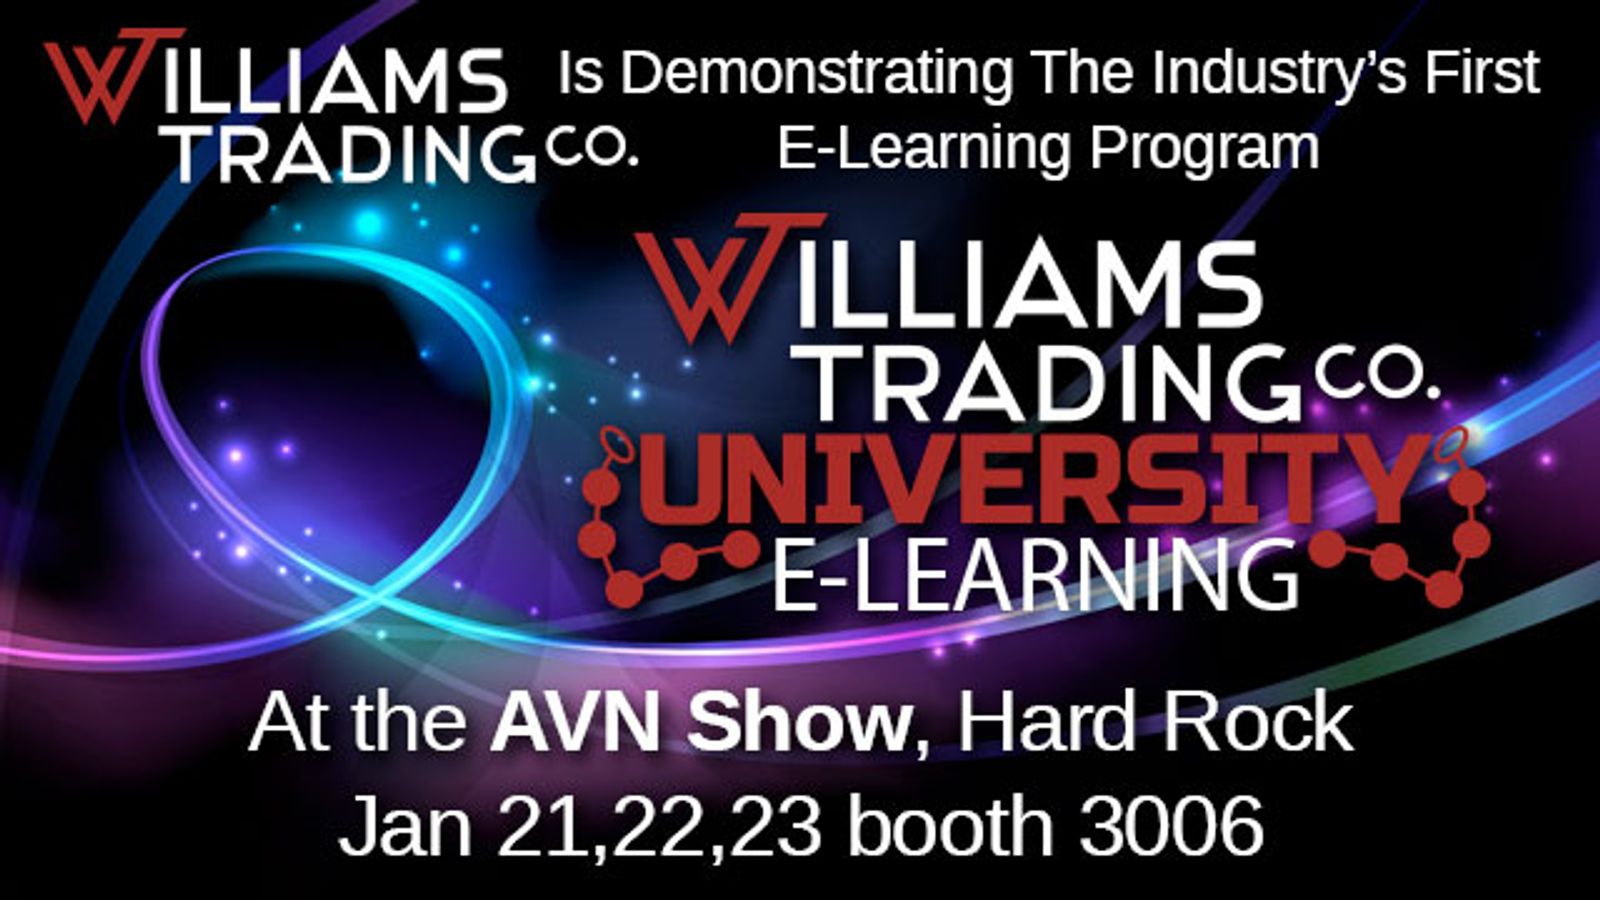 Williams Trading to Demonstrate First E-Learning Program at AEE